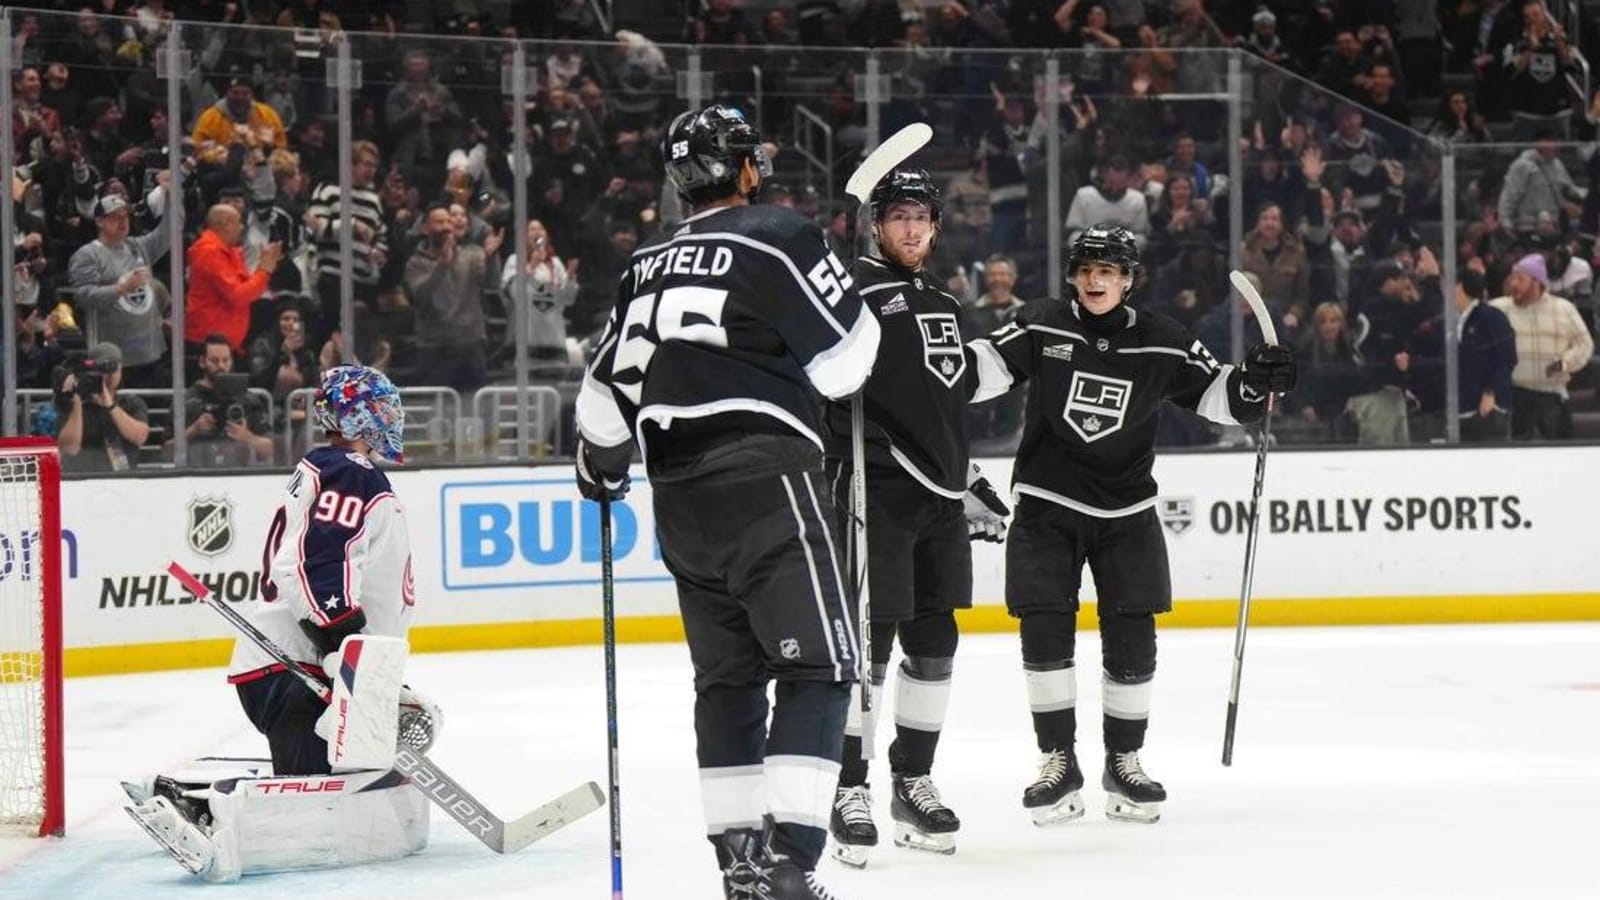 Pierre-Luc Dubois&#39; two goals lift Kings over Jackets